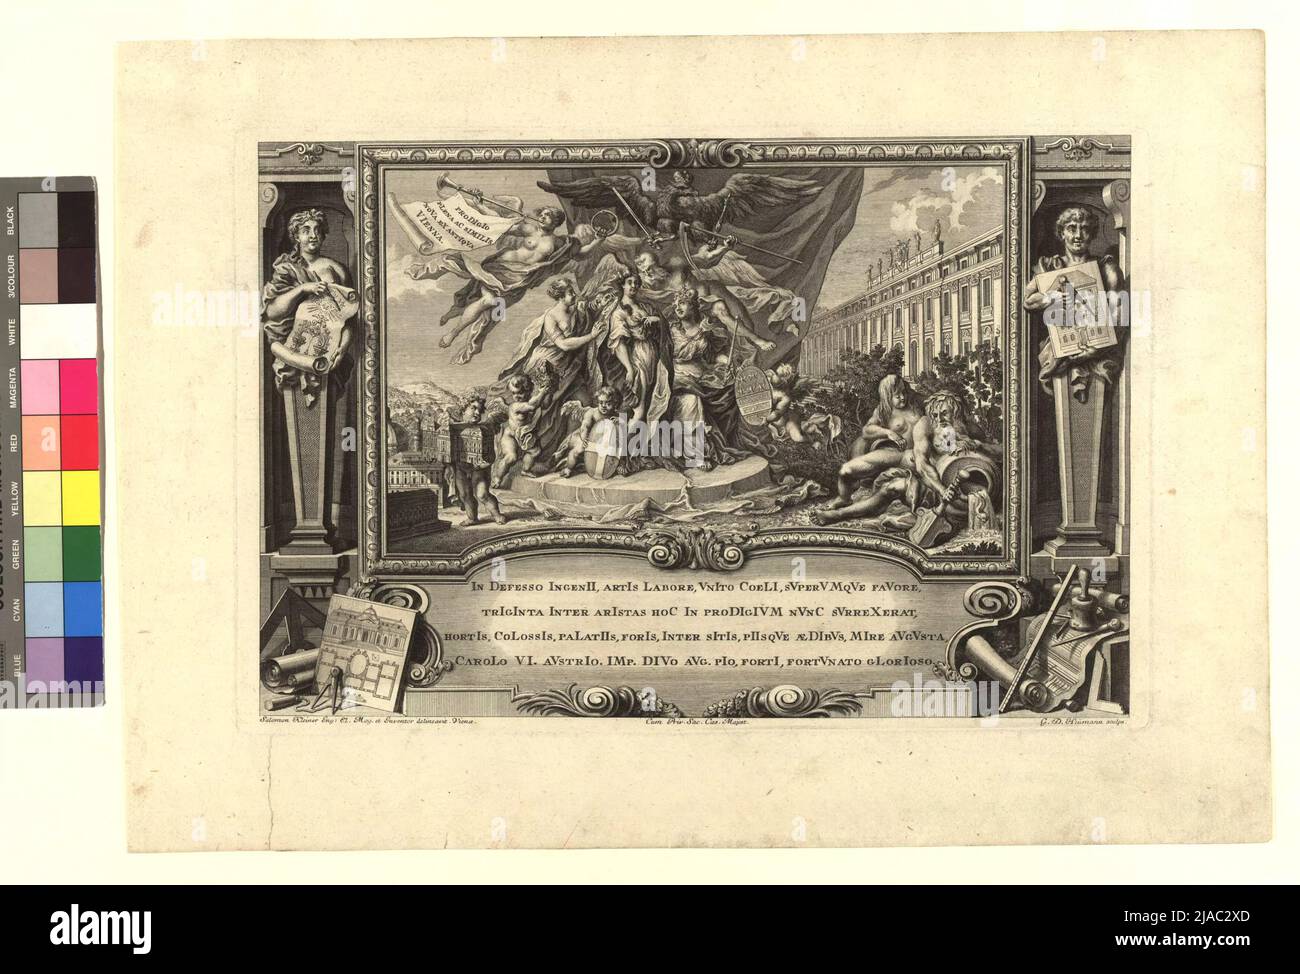 Allegory in Vienna, from: True and accurate illustration (...), 3rd part. After: Salomon Kleiner (1700-1761), Drawer, Georg Daniel Heumann (1691-1750), Copper Engraver, Johann Andreas d. Ä. Pfeffel (1674-1748), publisher Stock Photo